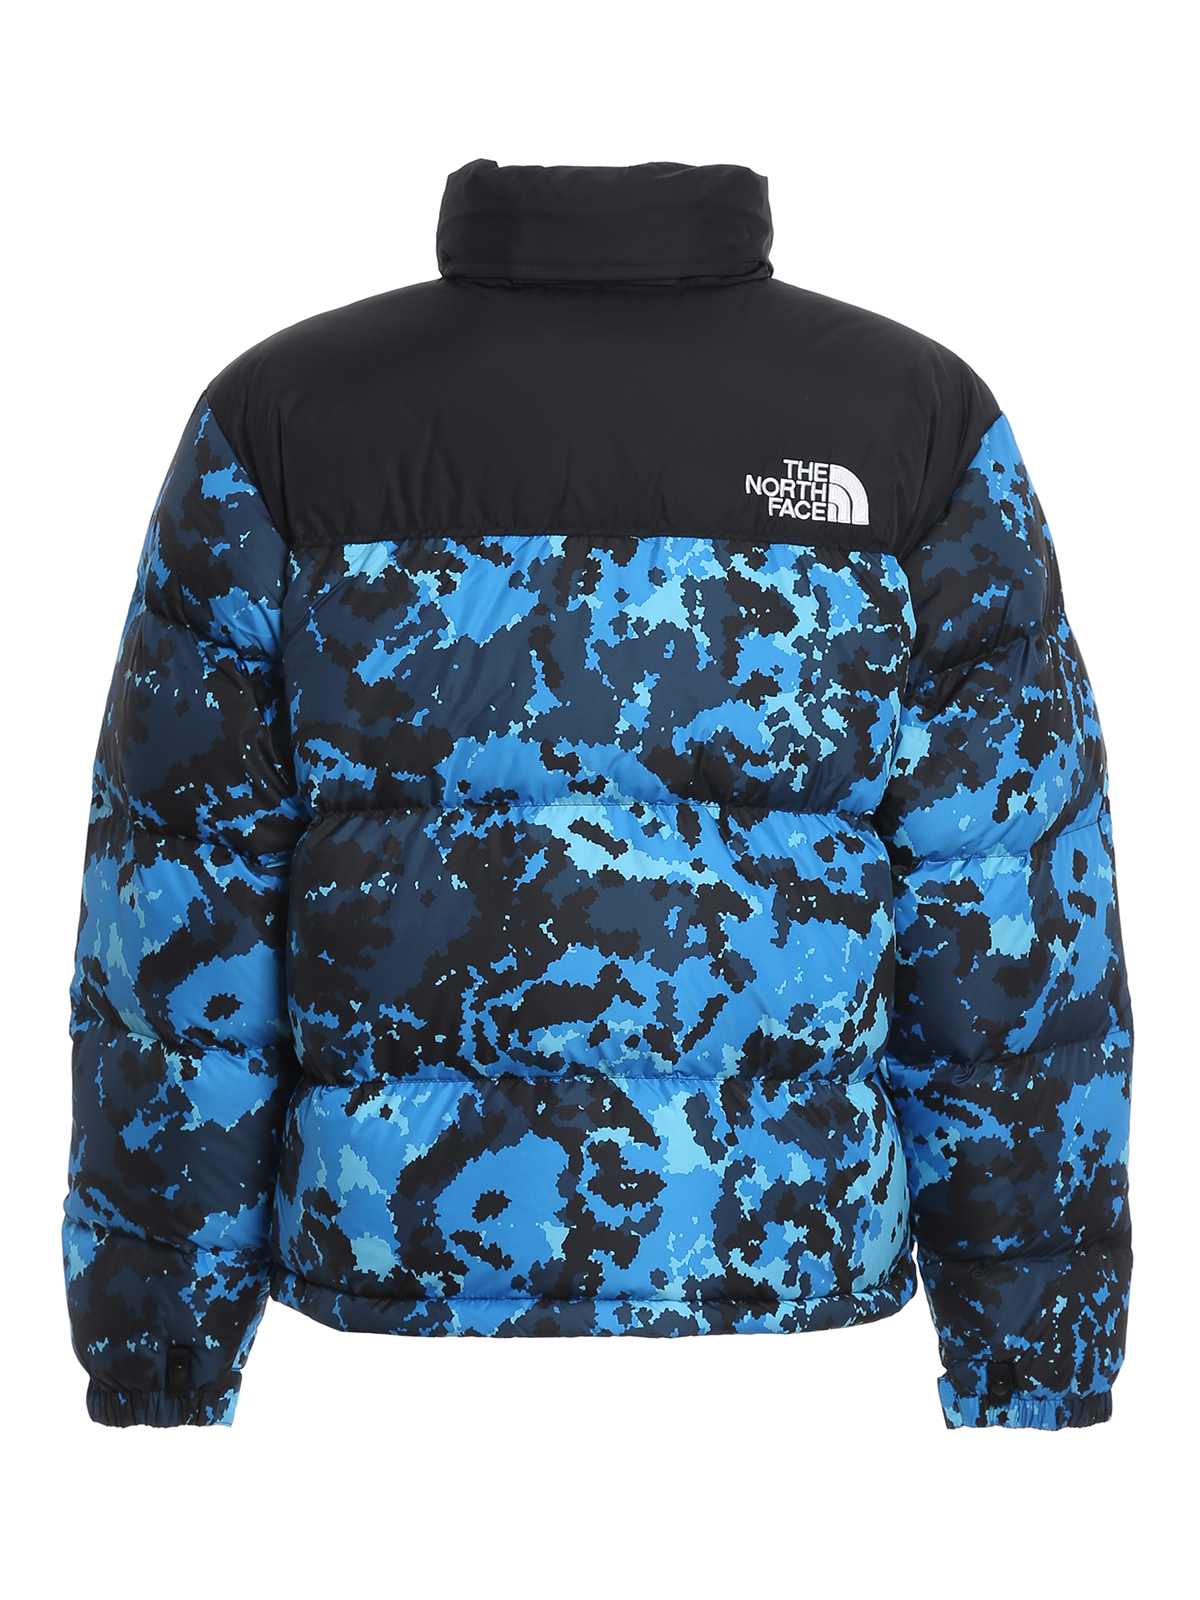 the north face retro puffer jacket